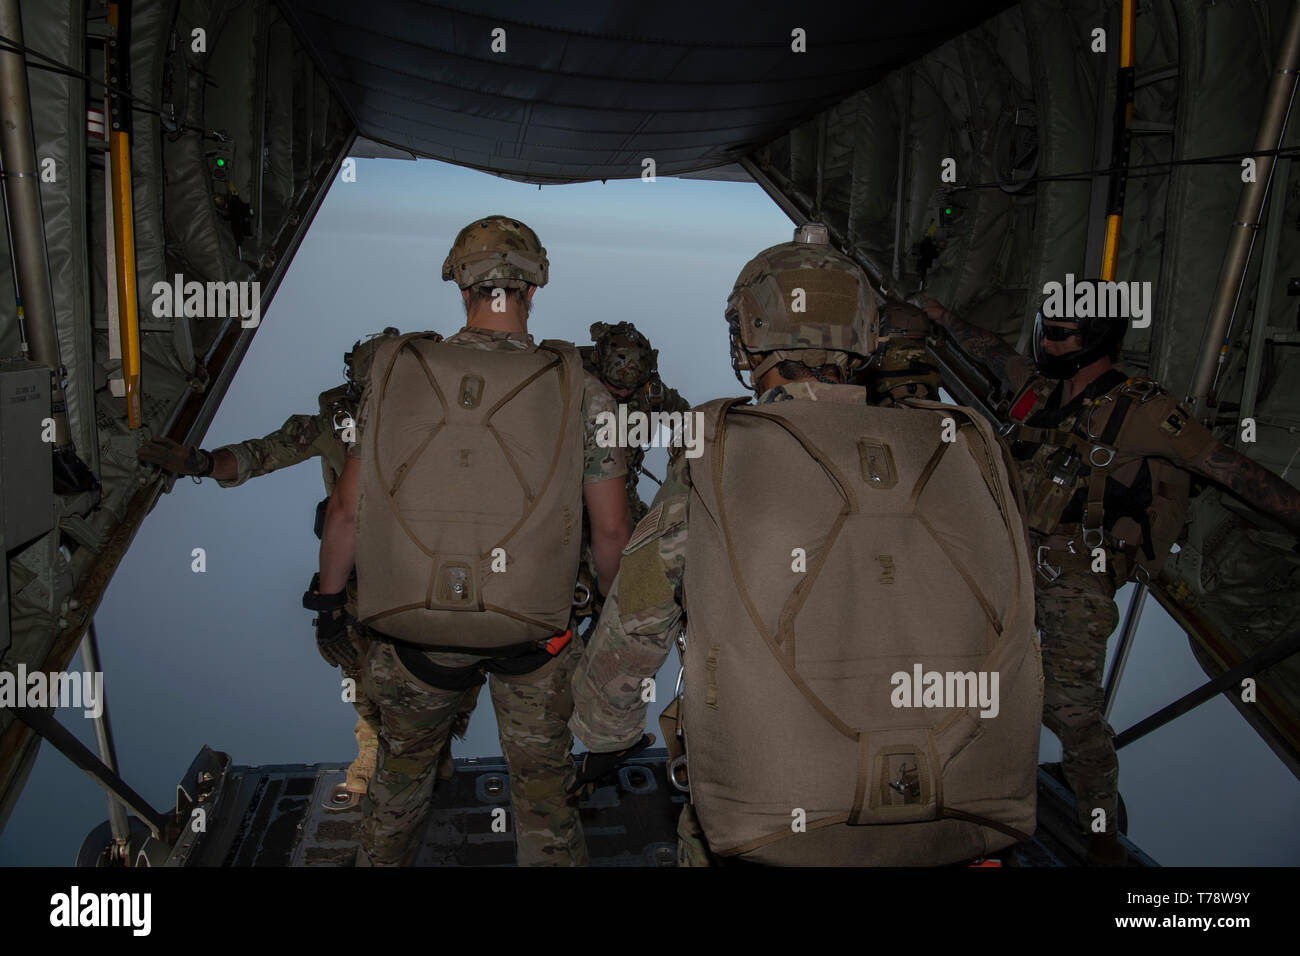 U.S. service members participate in a High Altitude Low Open (HALO) parachute jump from a C-130 Hercules near Camp Lemonnier, Djibouti, April 20, 2019. (U.S. Air Force Photo by Tech Sgt. Chris Hibben) Stock Photo